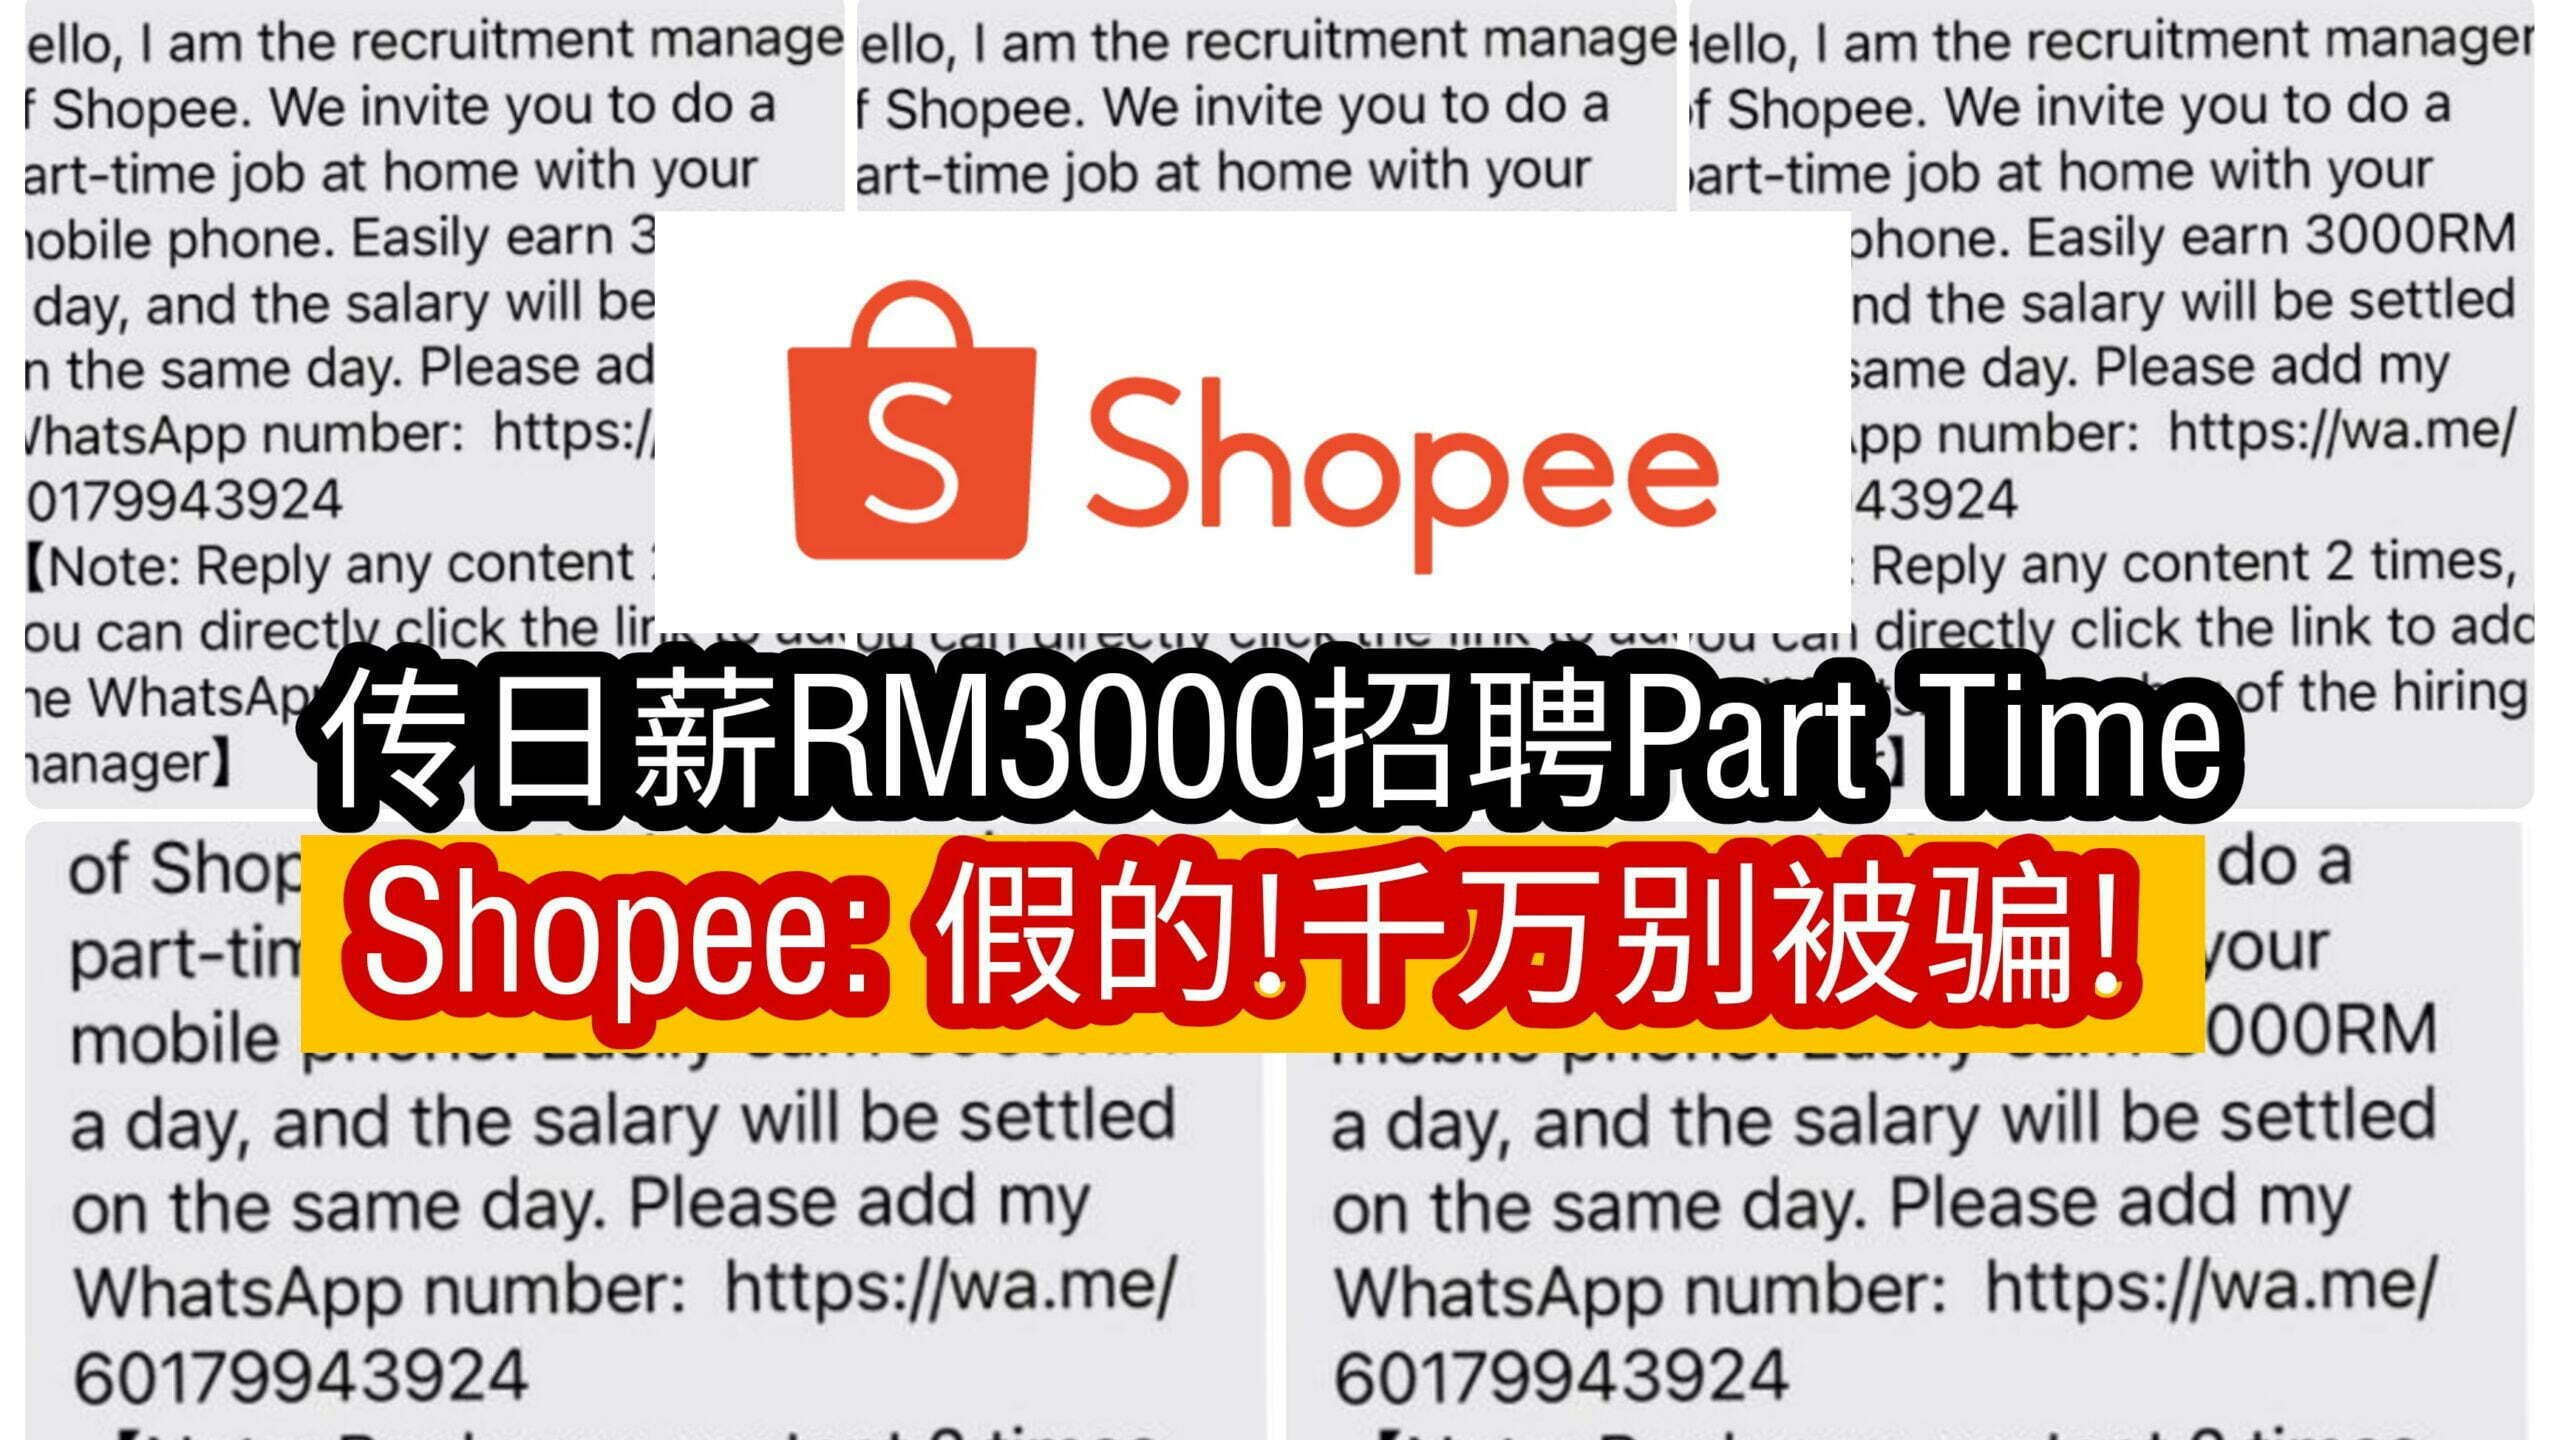 Shopee Careers - Come Make History With Us